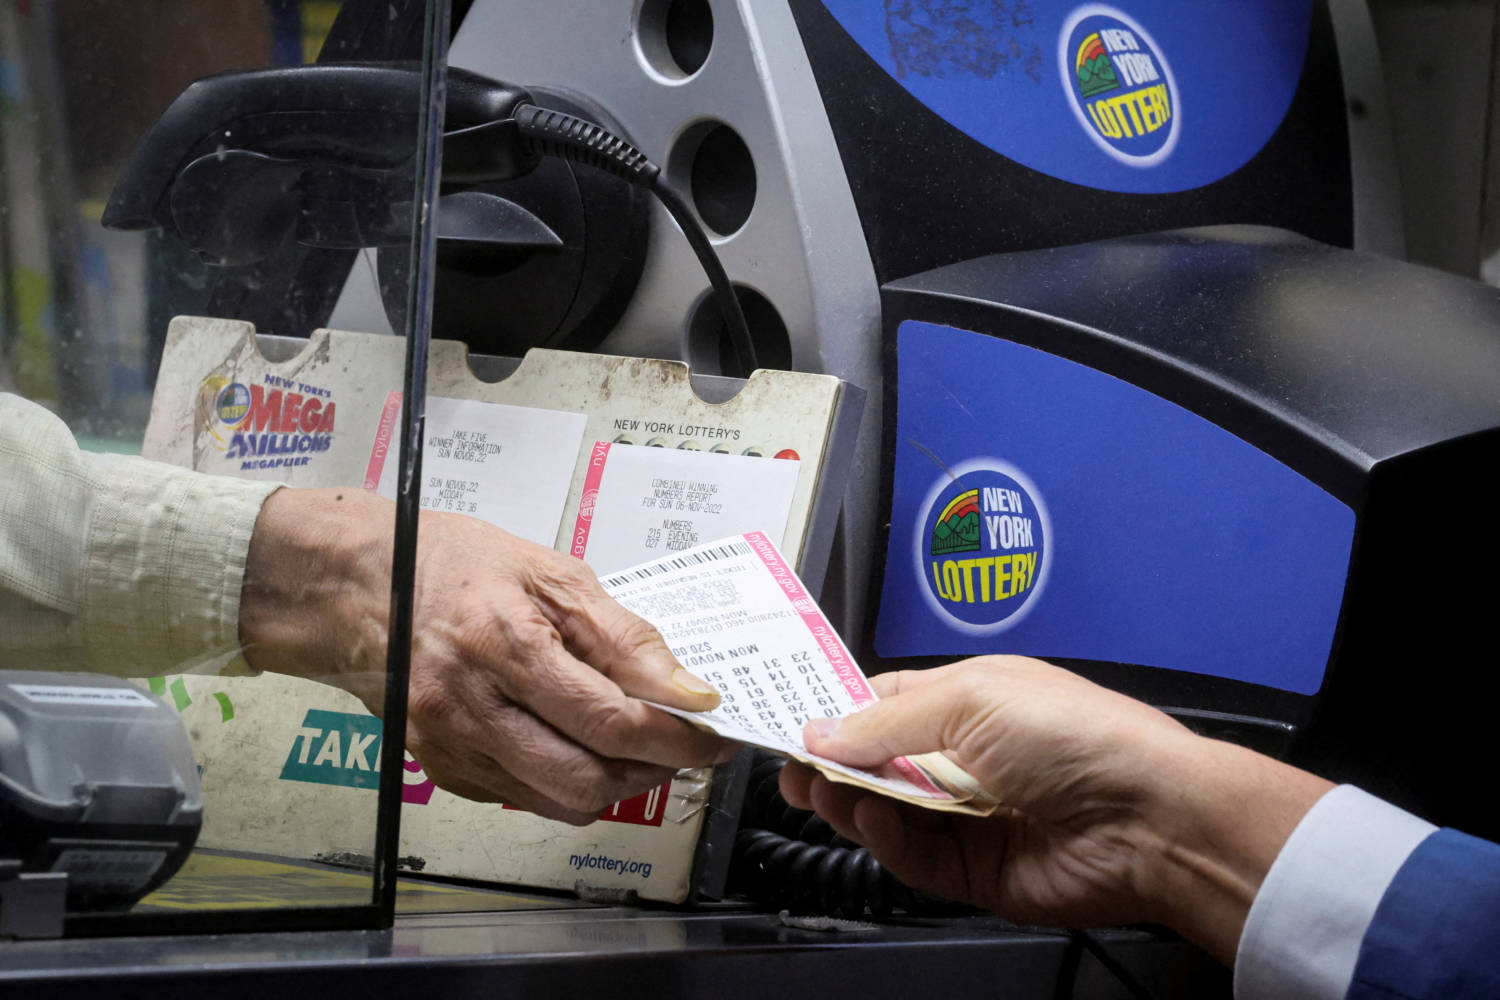 File Photo: Customer Buys Powerball Lottery Ticket In New York